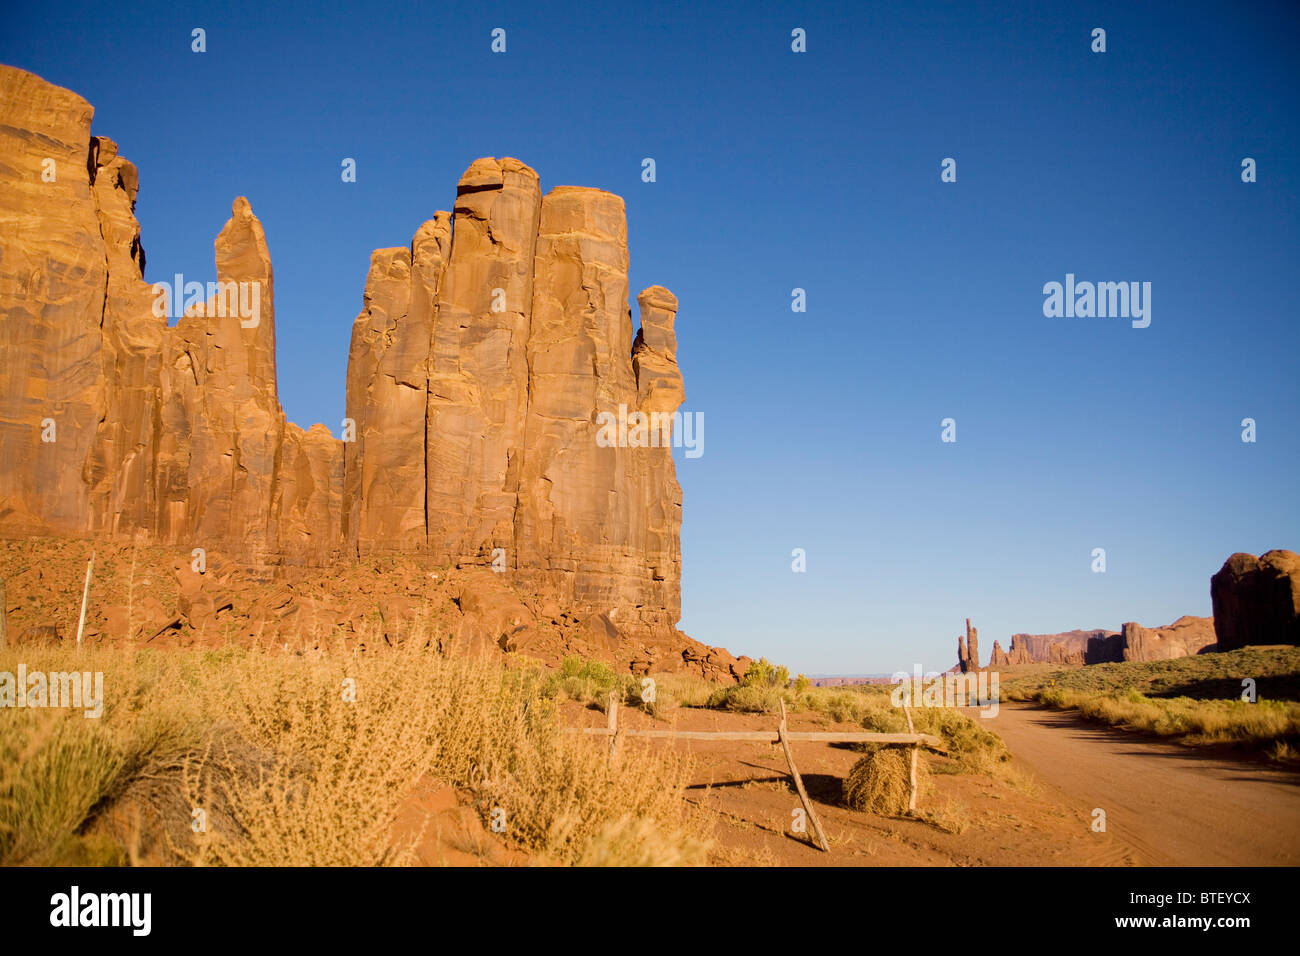 Monument valley rock formations - Utah USA Stock Photo